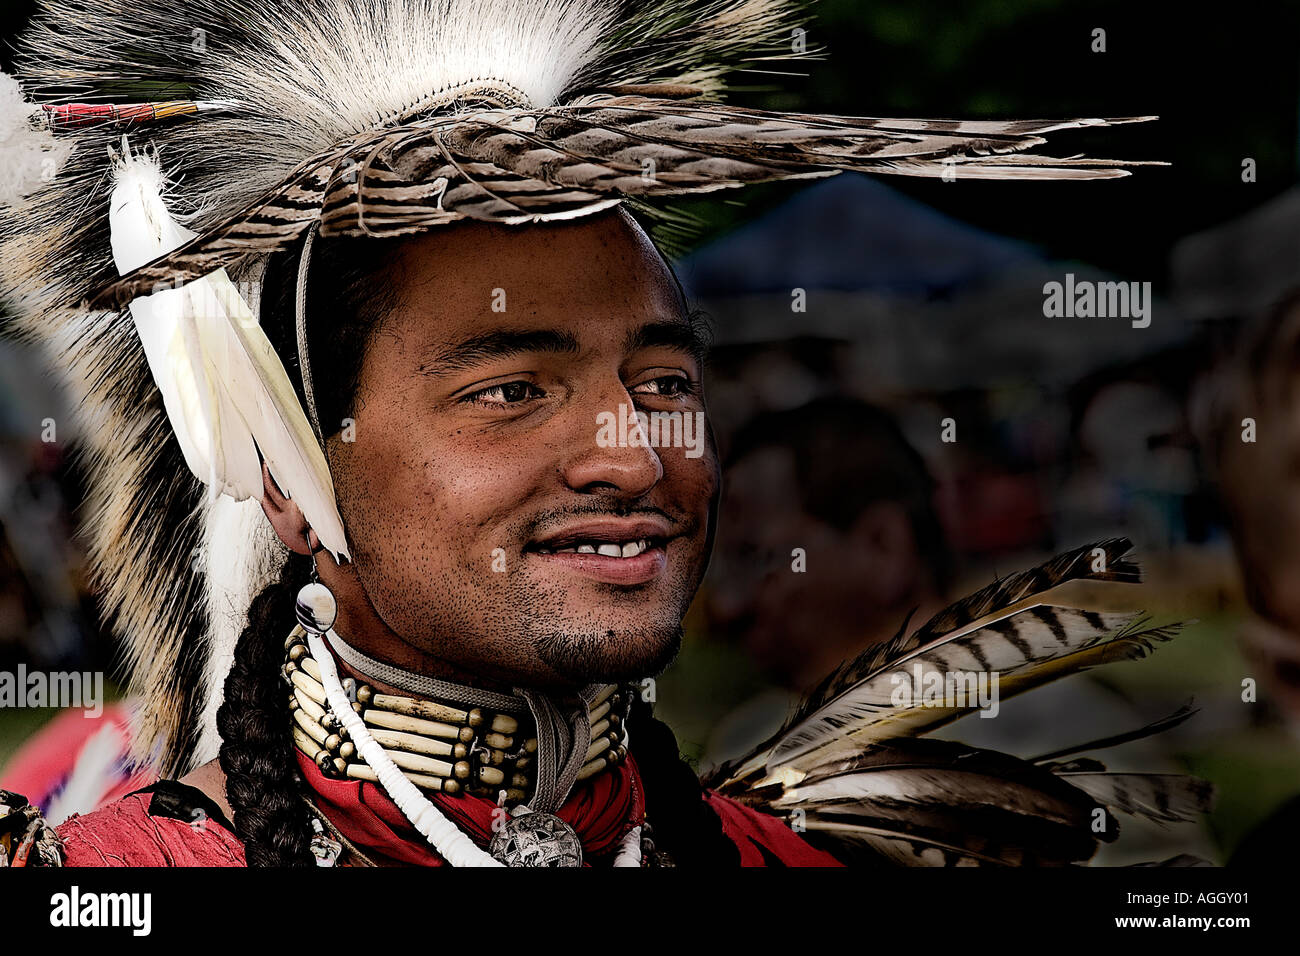 Native American man in full dress at a powwow traditional dance competition wearing feathered headdress and jewelry Stock Photo